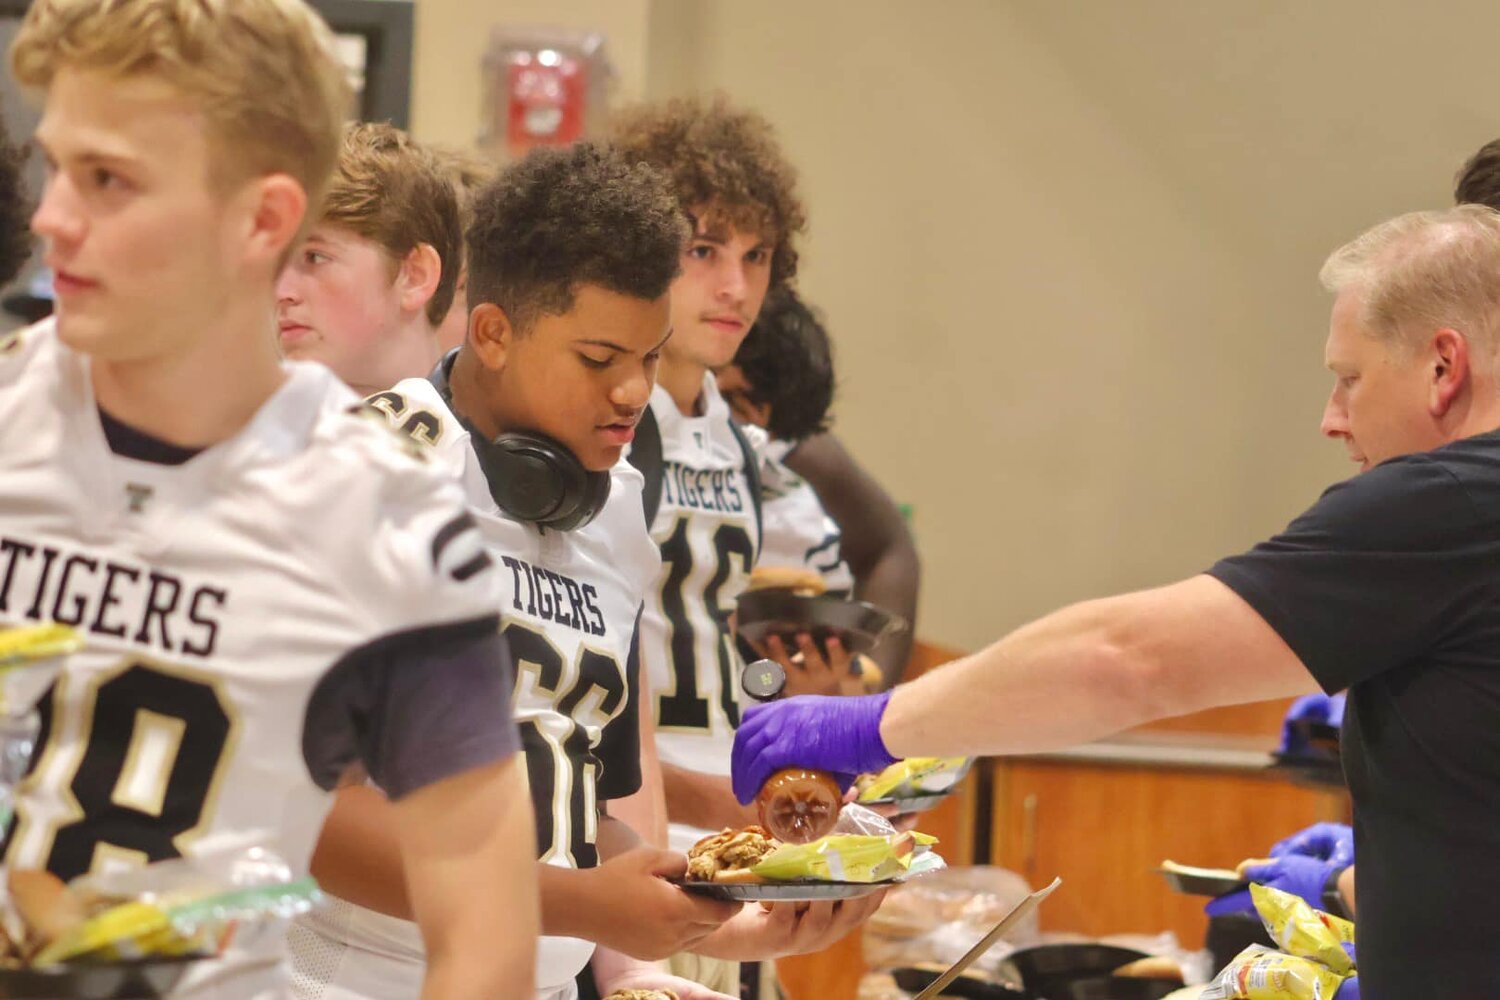 Servers dish up barbecue to football players at Gridiron Day in Carroll County, Ga.